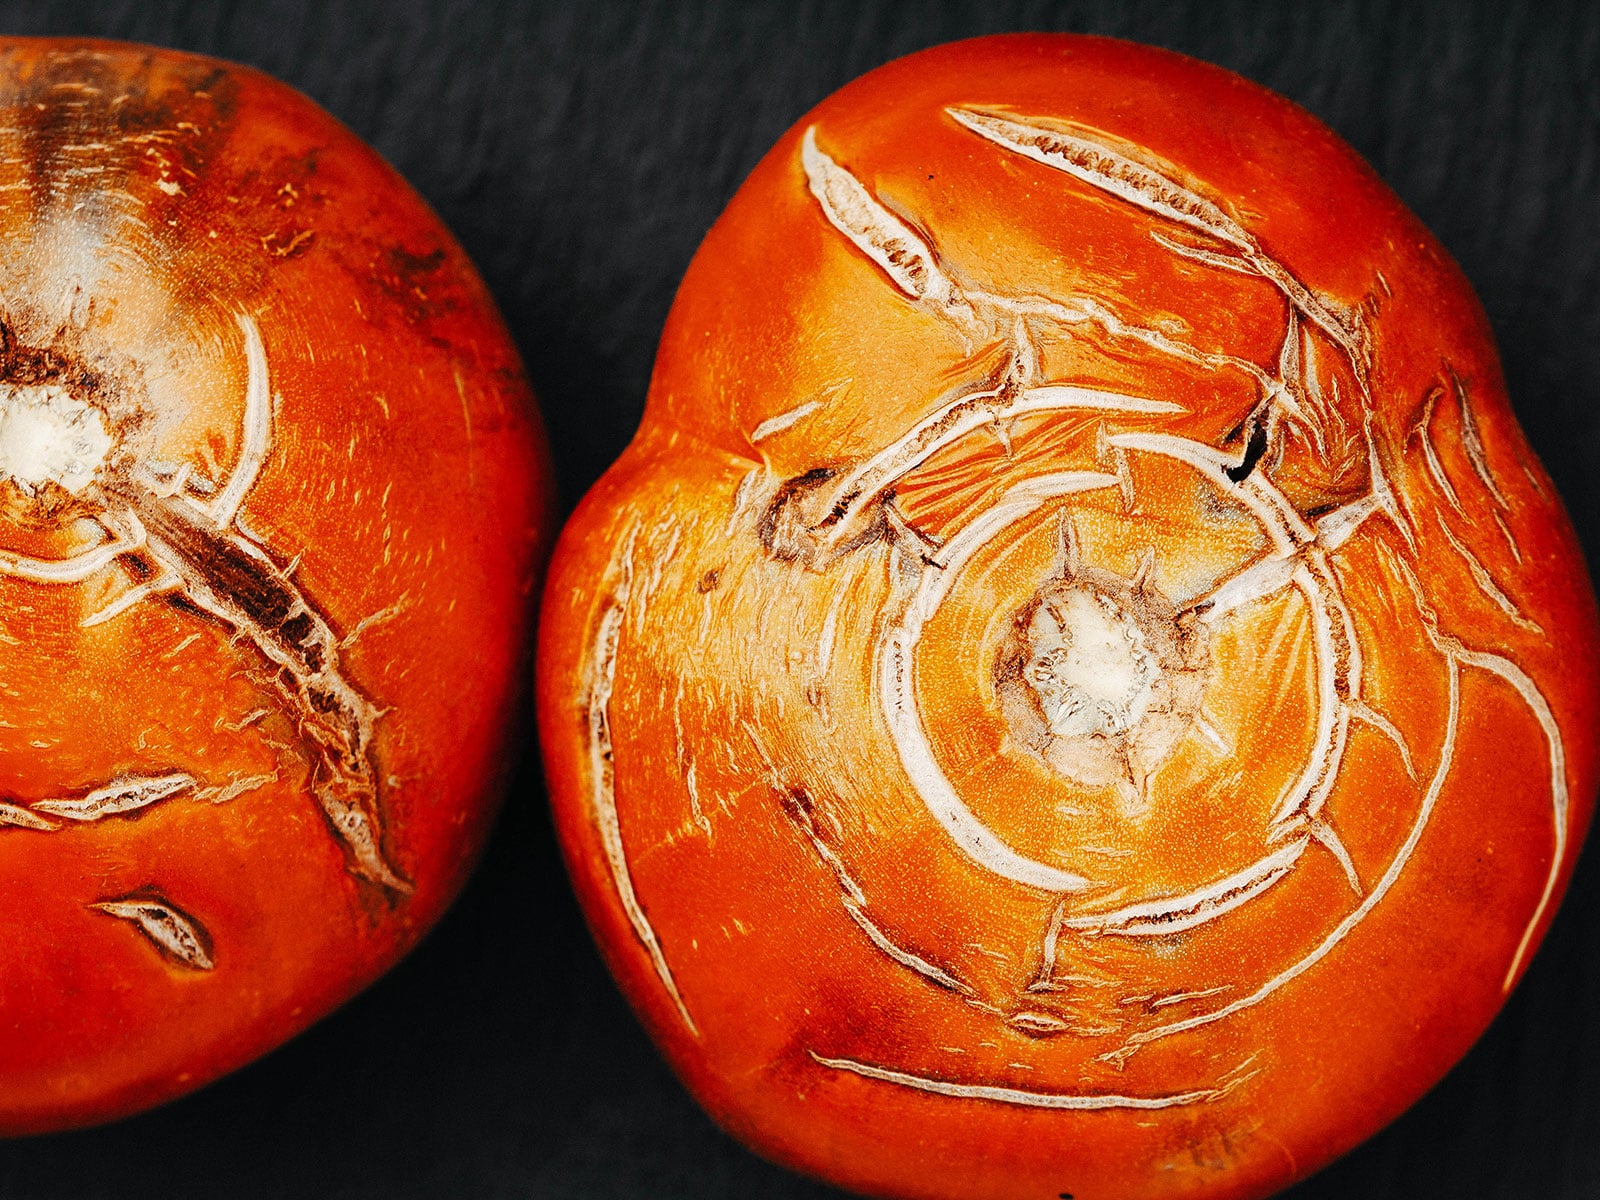 Overhead shot of red tomatoes on a dark surface, with concentric cracks on the stem side of the fruit